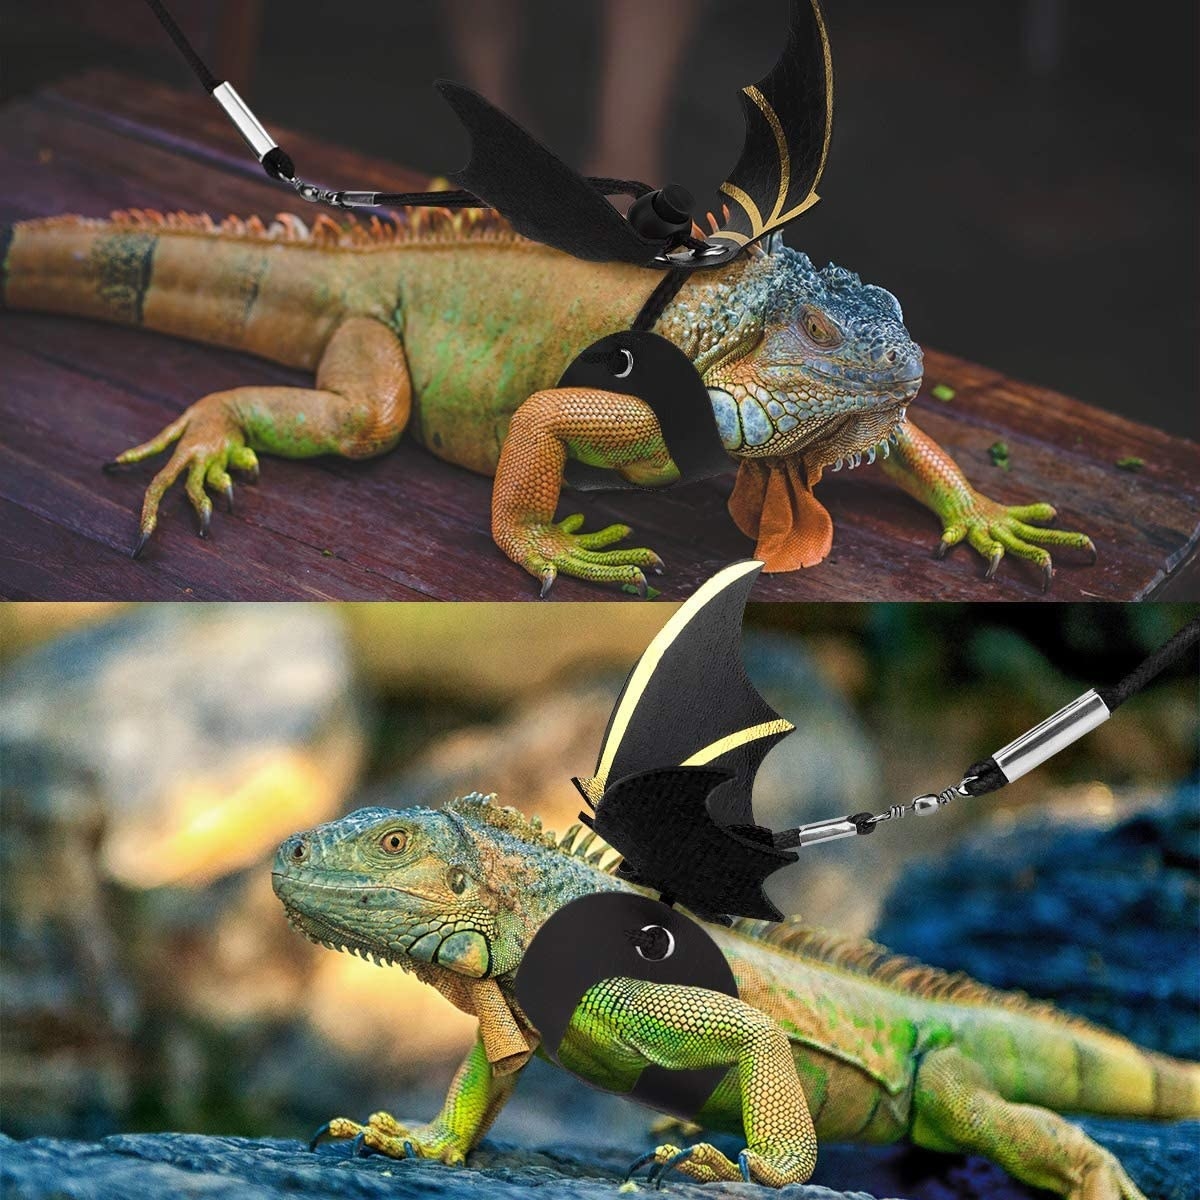 Two photos, stacked vertically, of a lizard in a harness and leash with dragon wing detailing